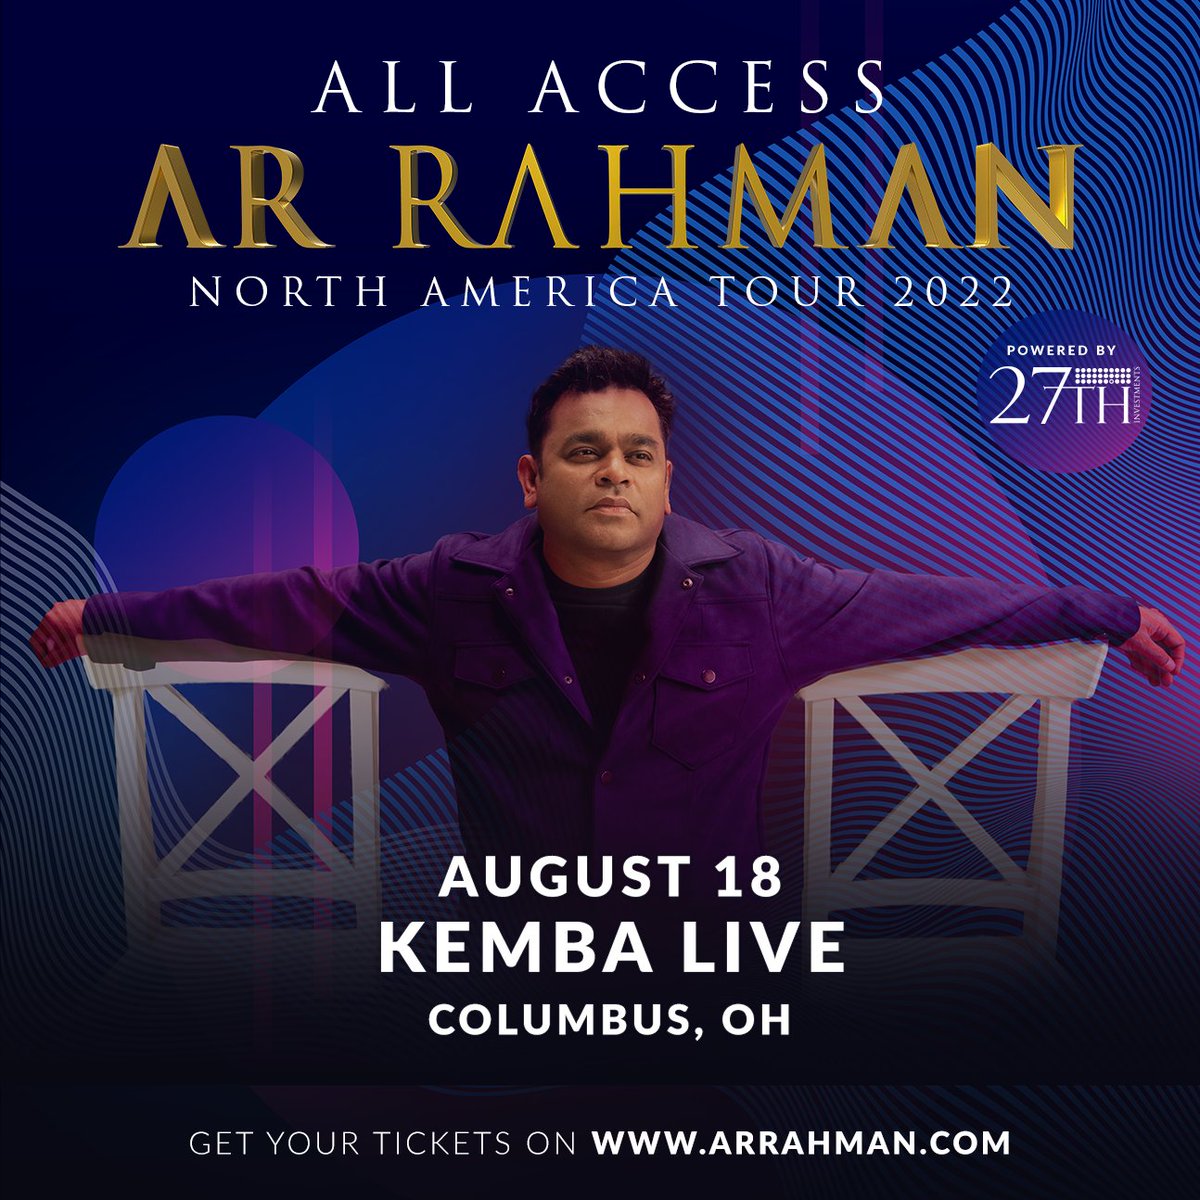 Columbus! Here we come! Excited to be performing at Kemba Live on August 18! Get your tickets on arrahman.com

#arrahman #arrahmanlive #allaccessarrahman #northamericatour #healingworld #EPI